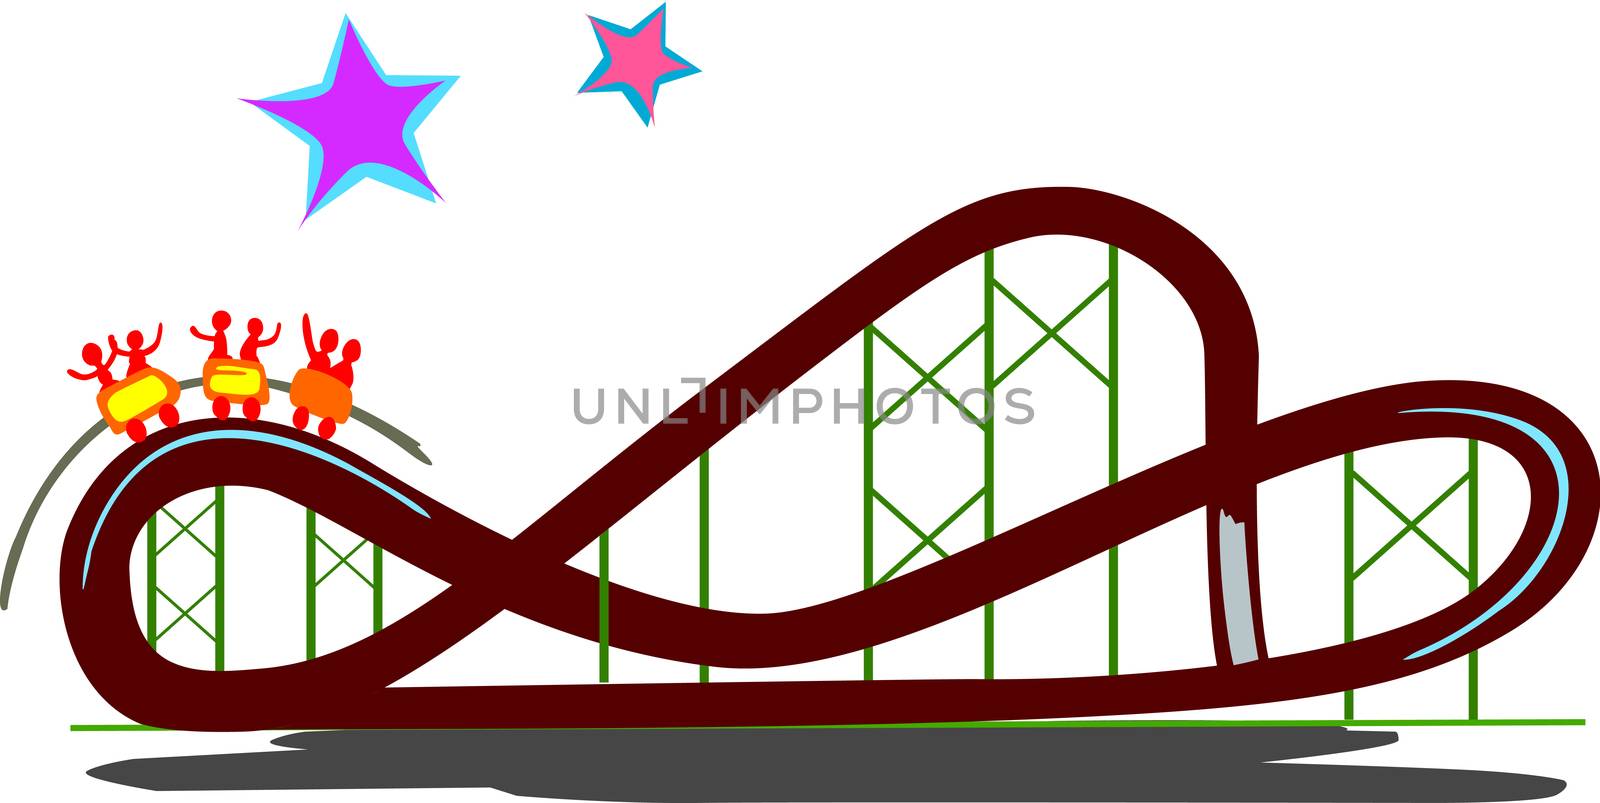 Representation of a real rollercoaster with happy patrons celebrating the ride.